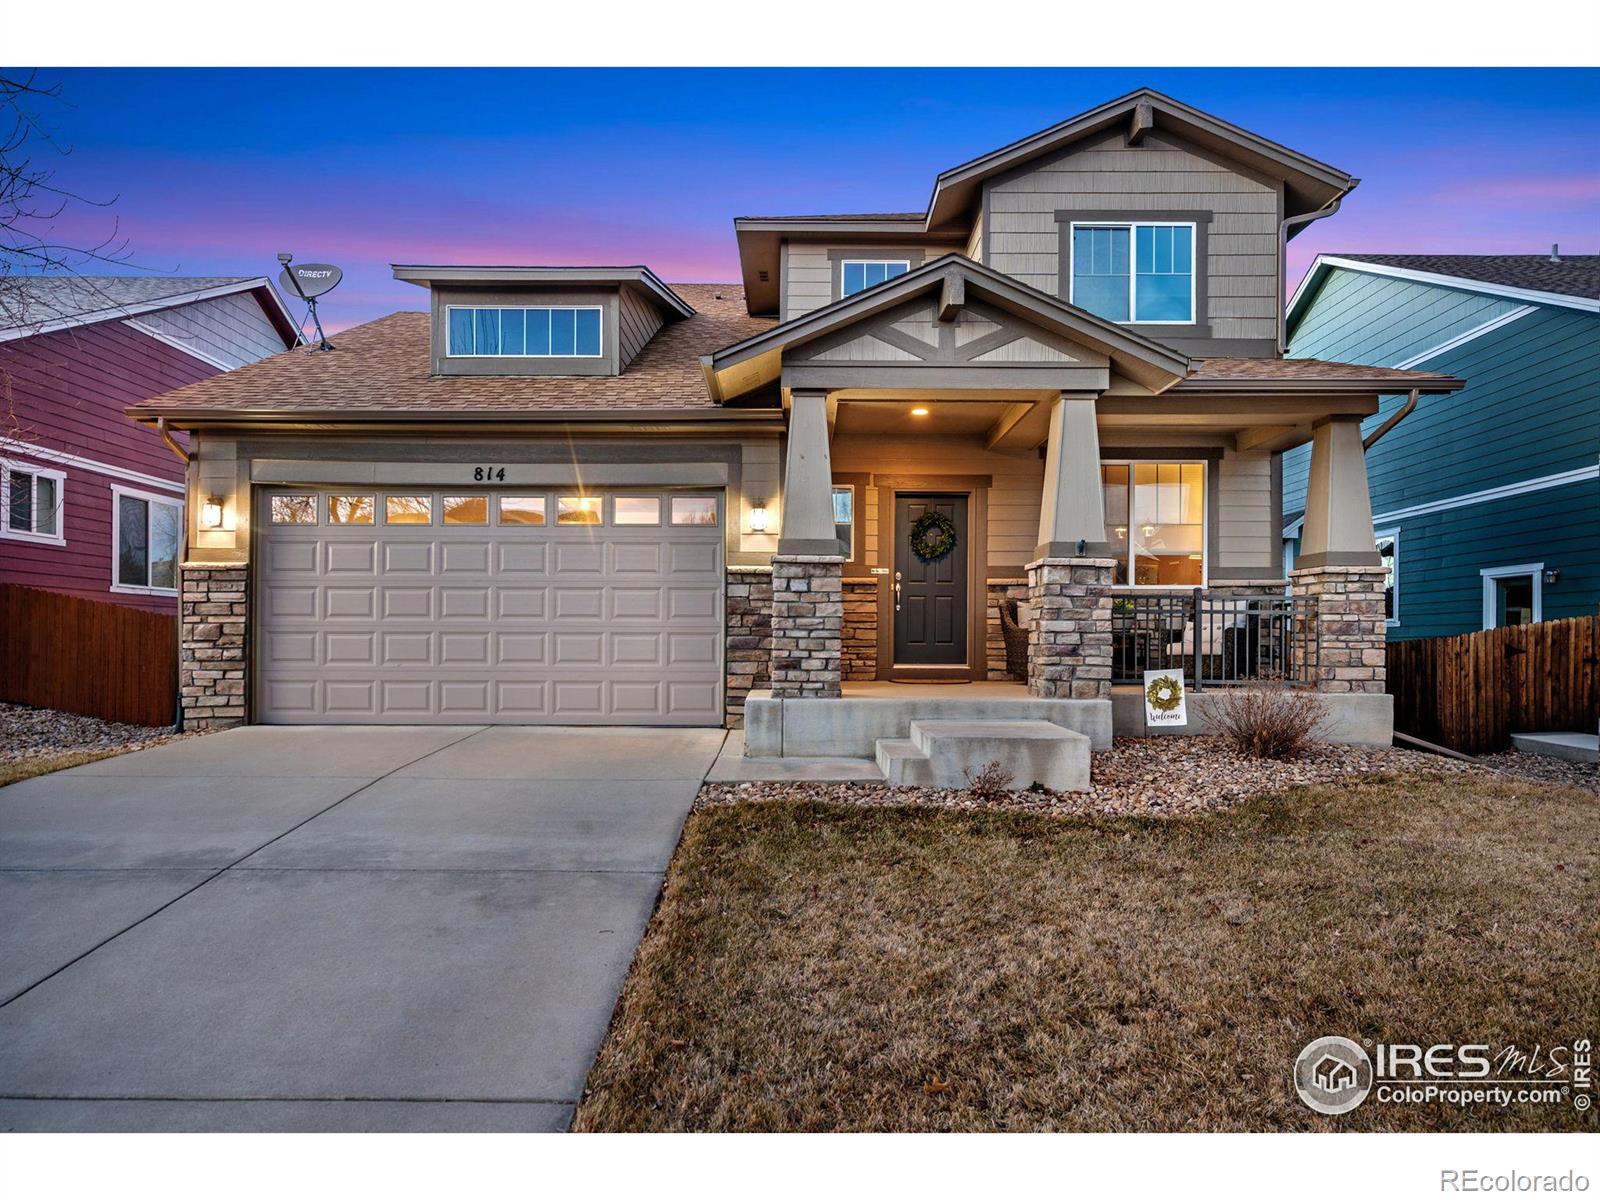 814  Snowy Plain Road, fort collins MLS: 4567891003471 Beds: 3 Baths: 3 Price: $669,000